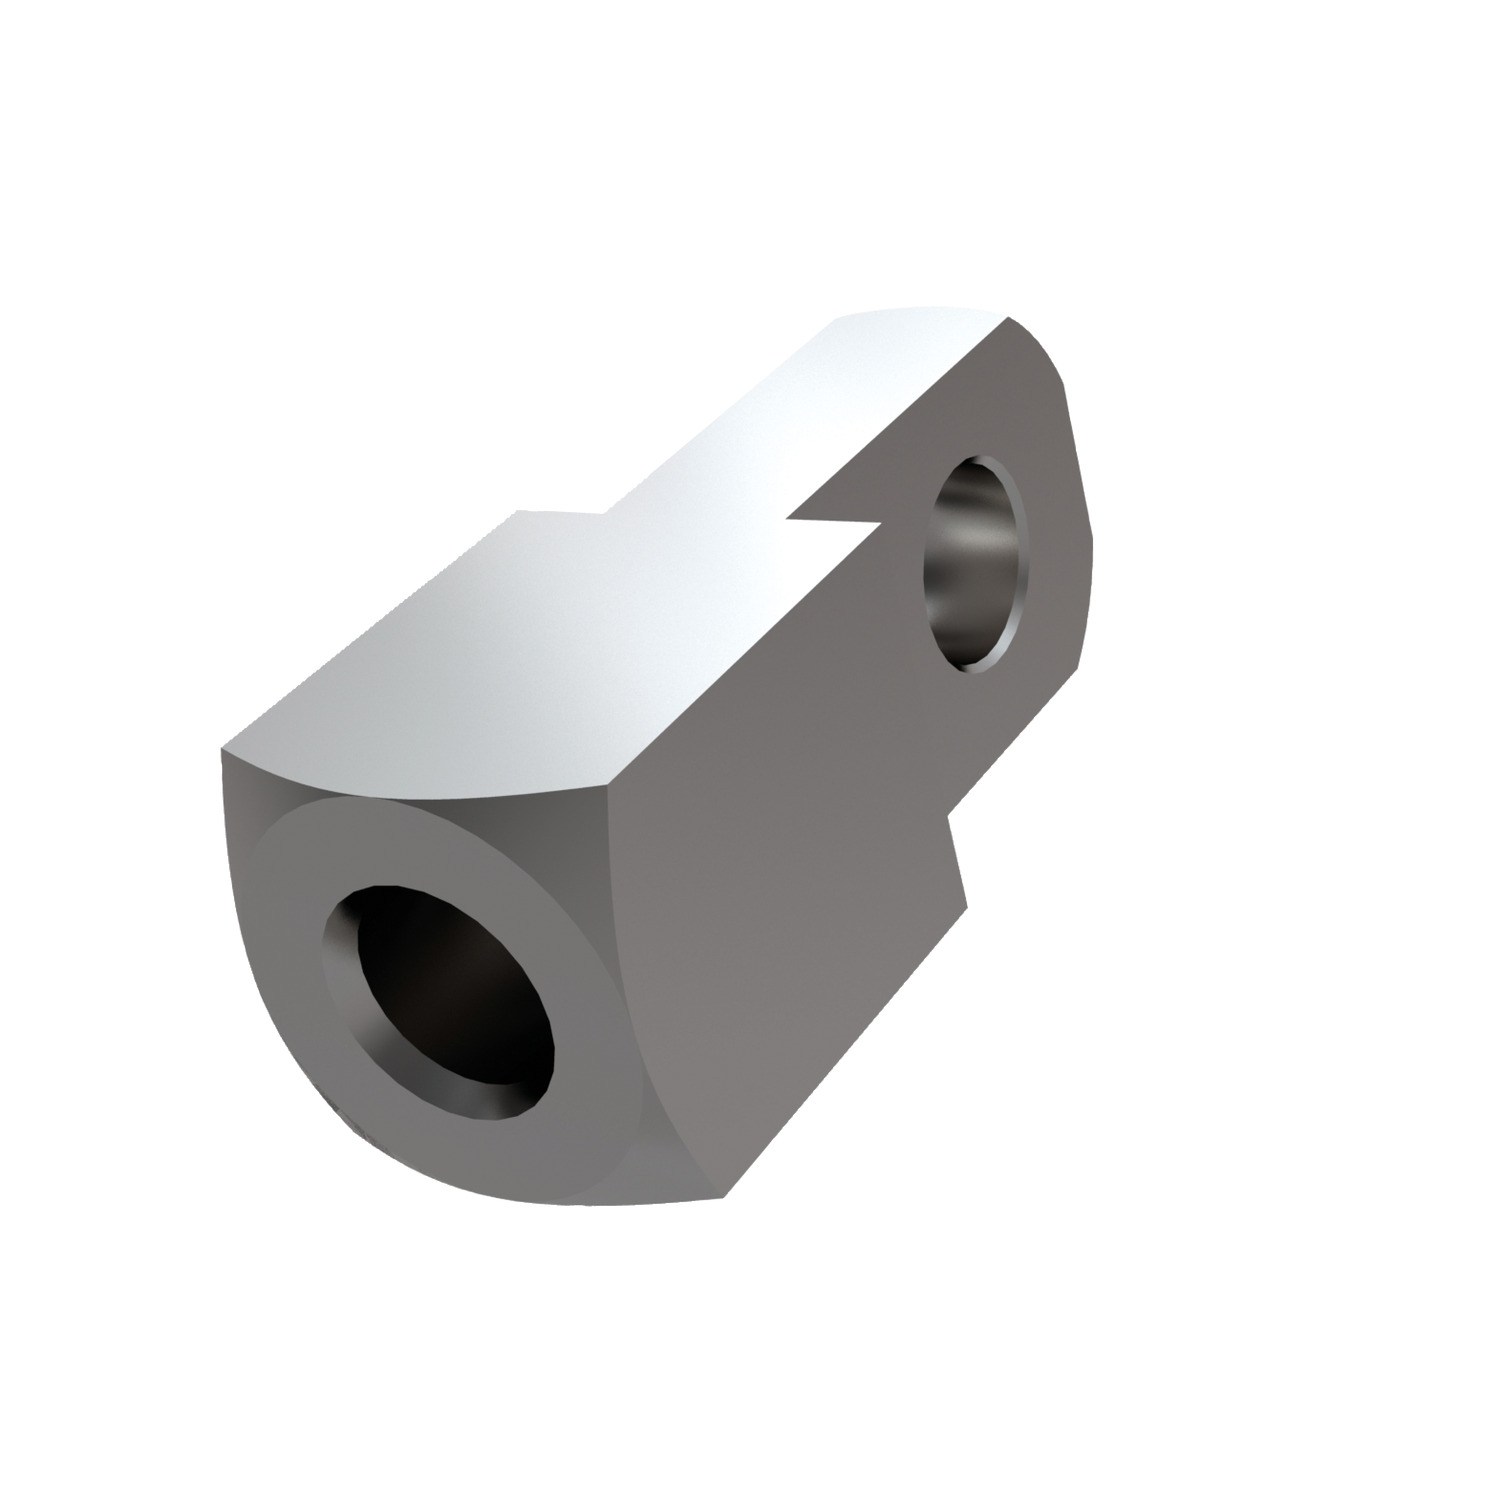 Stainless Mating Piece for Clevis Joints Stainless steel (AISI 303) mating piece for clevis joints, for standard right hand thread. Designed to fit in between forks of a clevis joint of the same size.